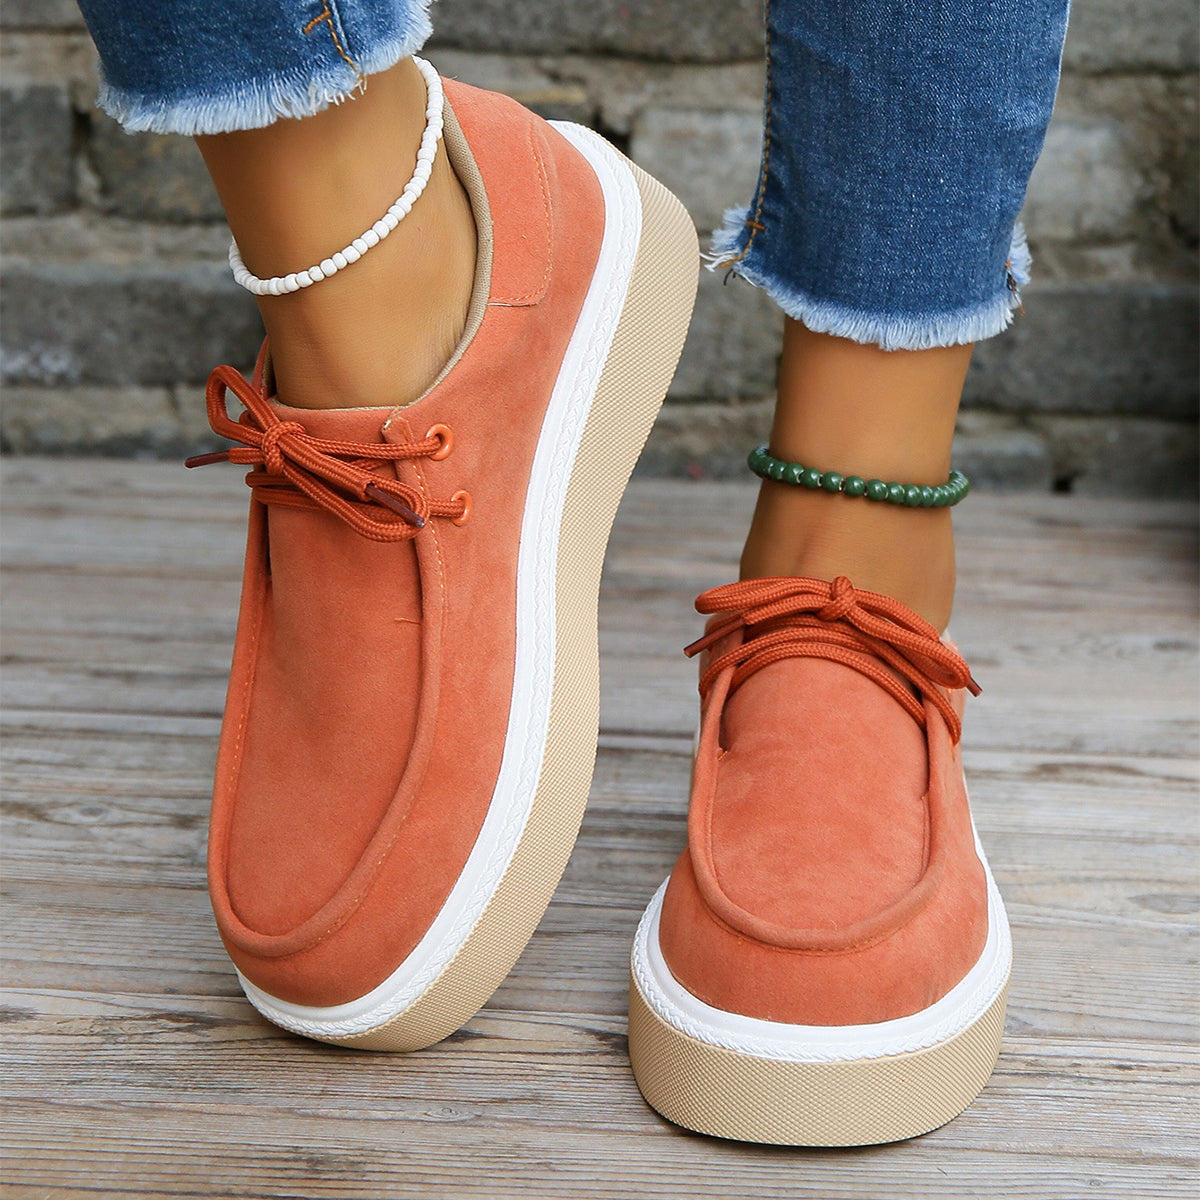 Lovemi -  Thick Bottom Lace-up Flats Women Solid Color Casual Fashion Lightweight Walking Sports Shoes